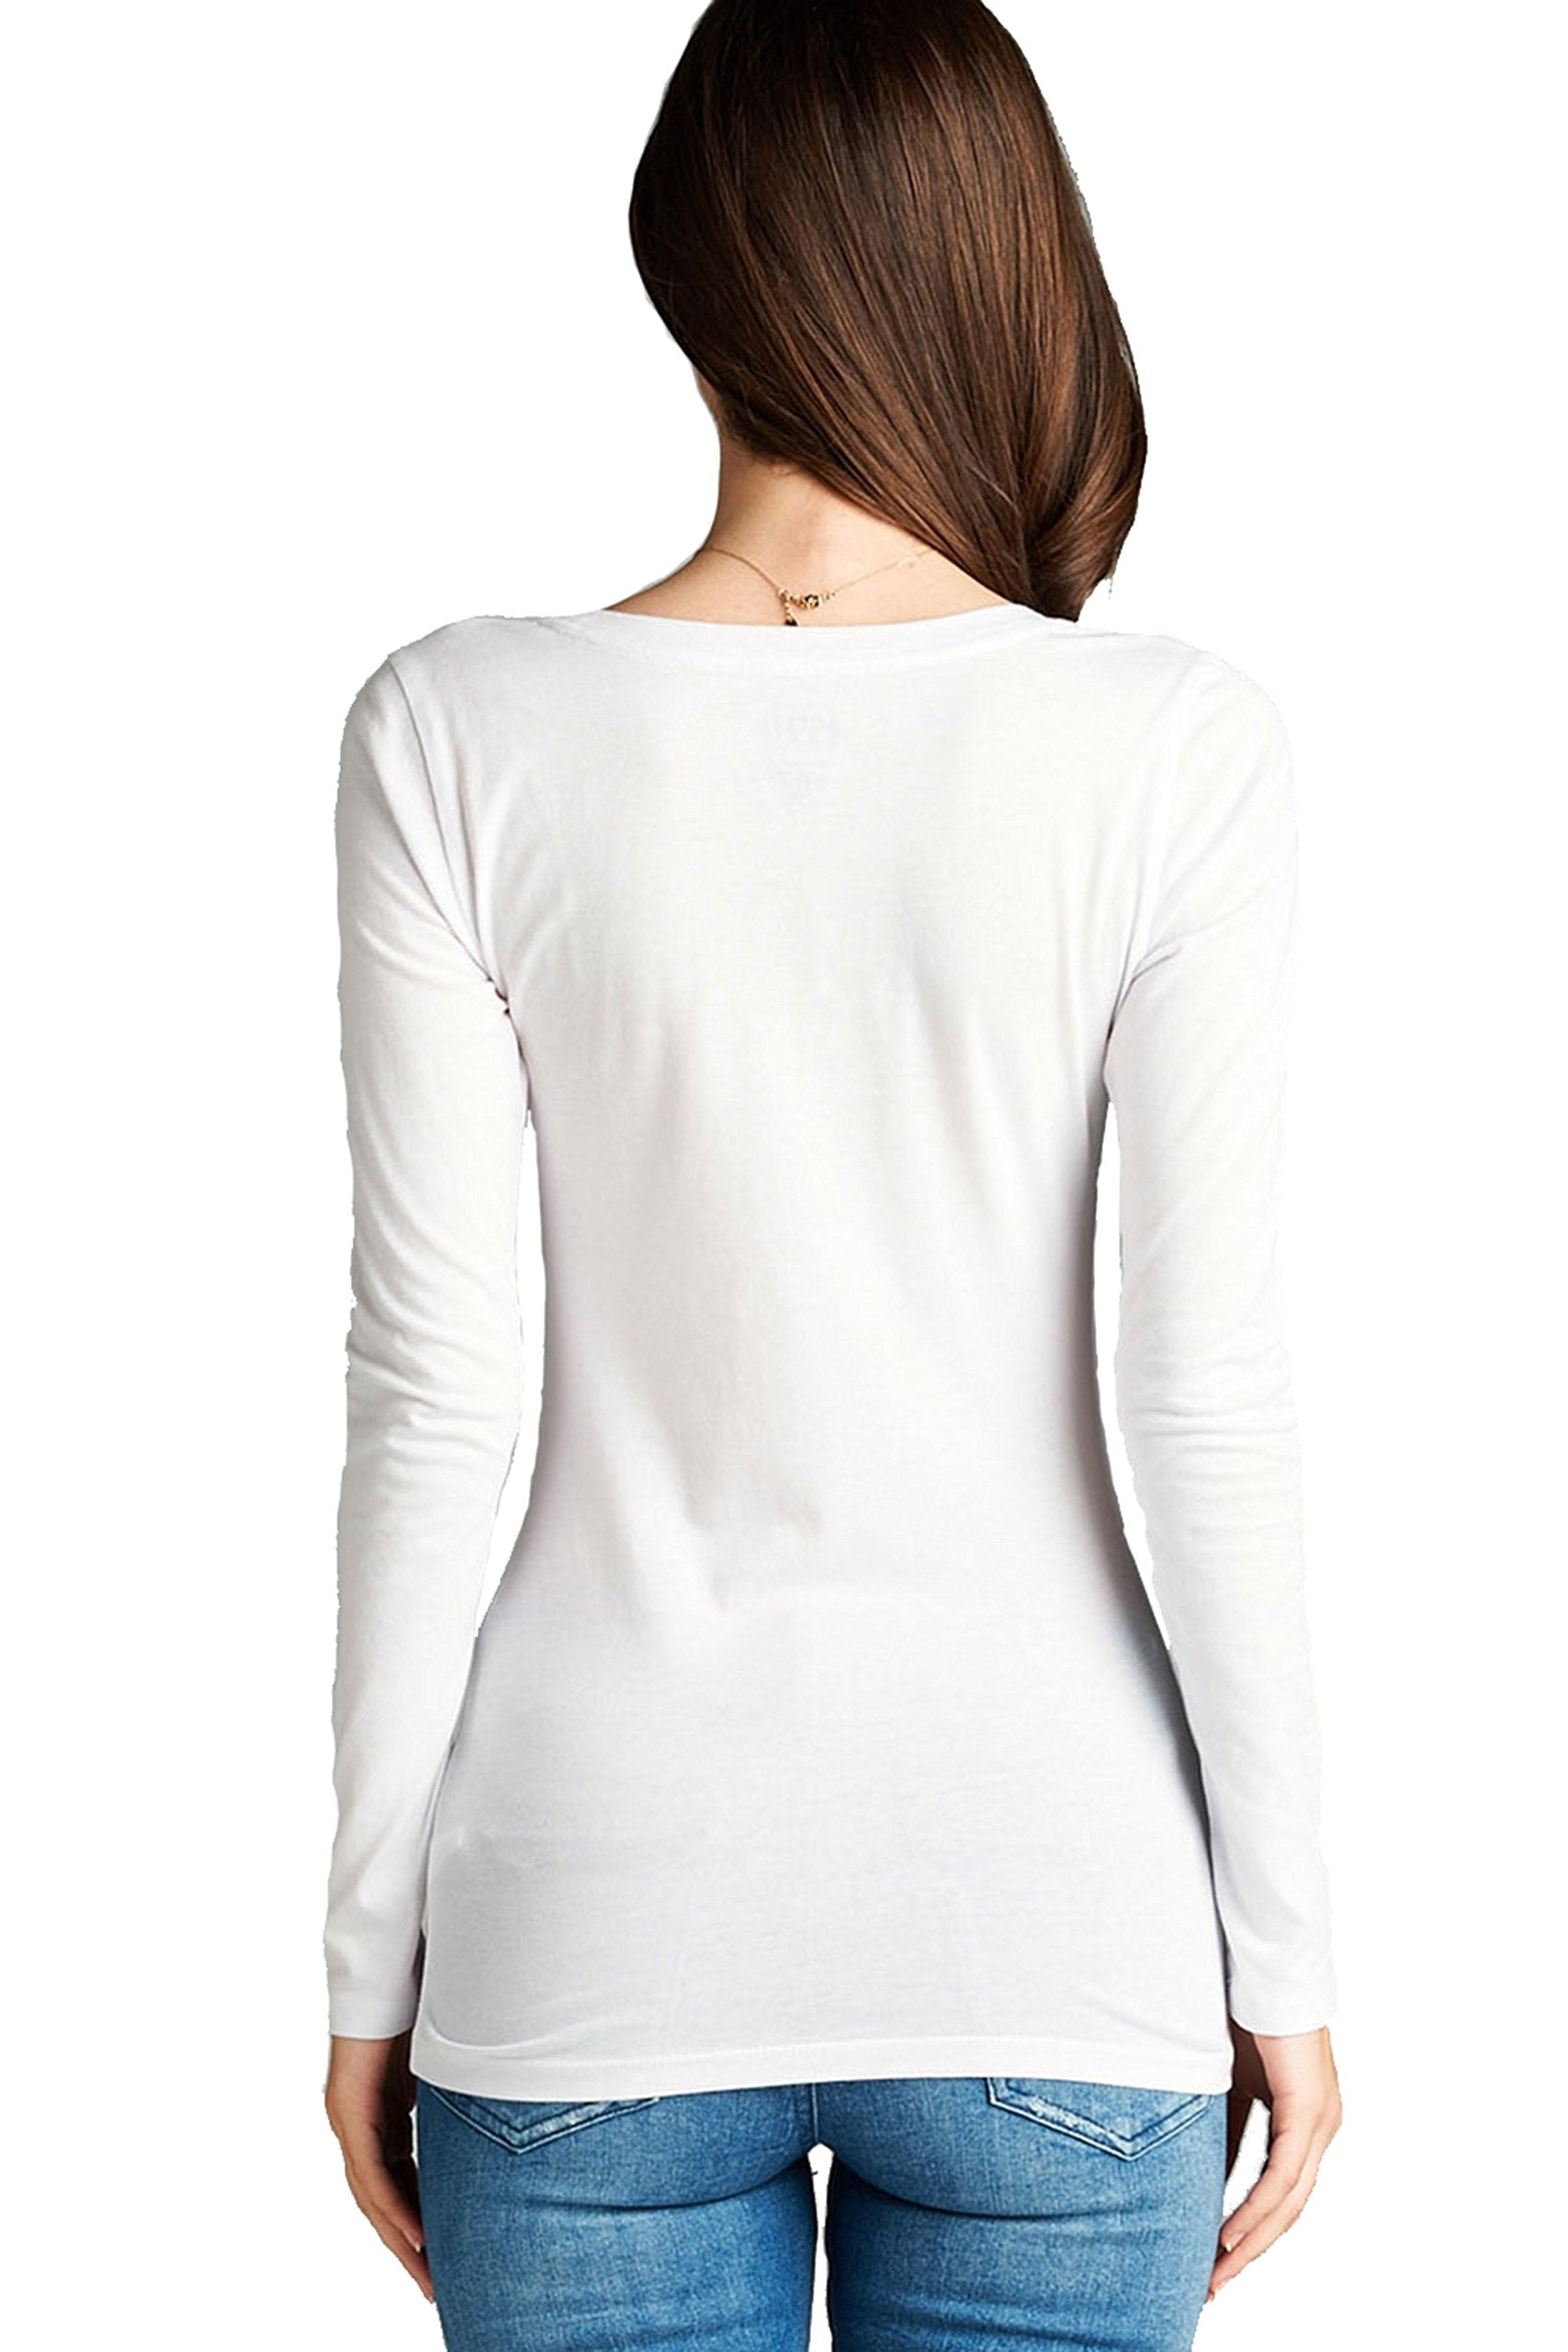 Hollywood Star Fashion Plain Casual Scoop Neck Long Sleeve Top